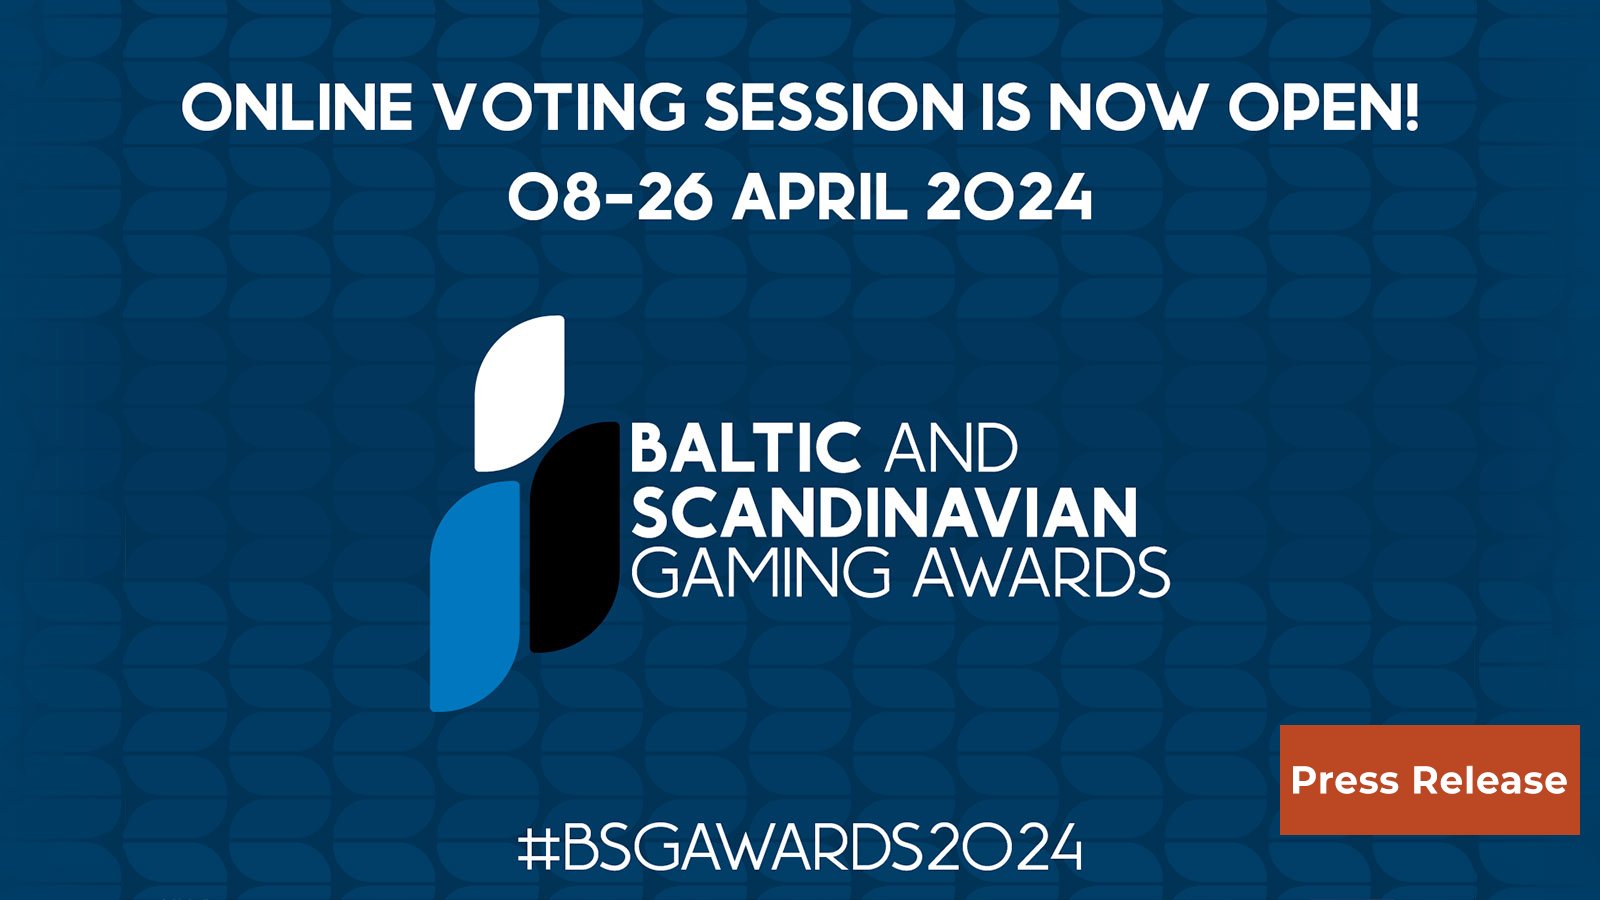 HIPTHER Invites You to Recognize Gaming Excellence at the Baltic & Scandinavian Gaming Awards 2024 – Online Voting Session is Now Open